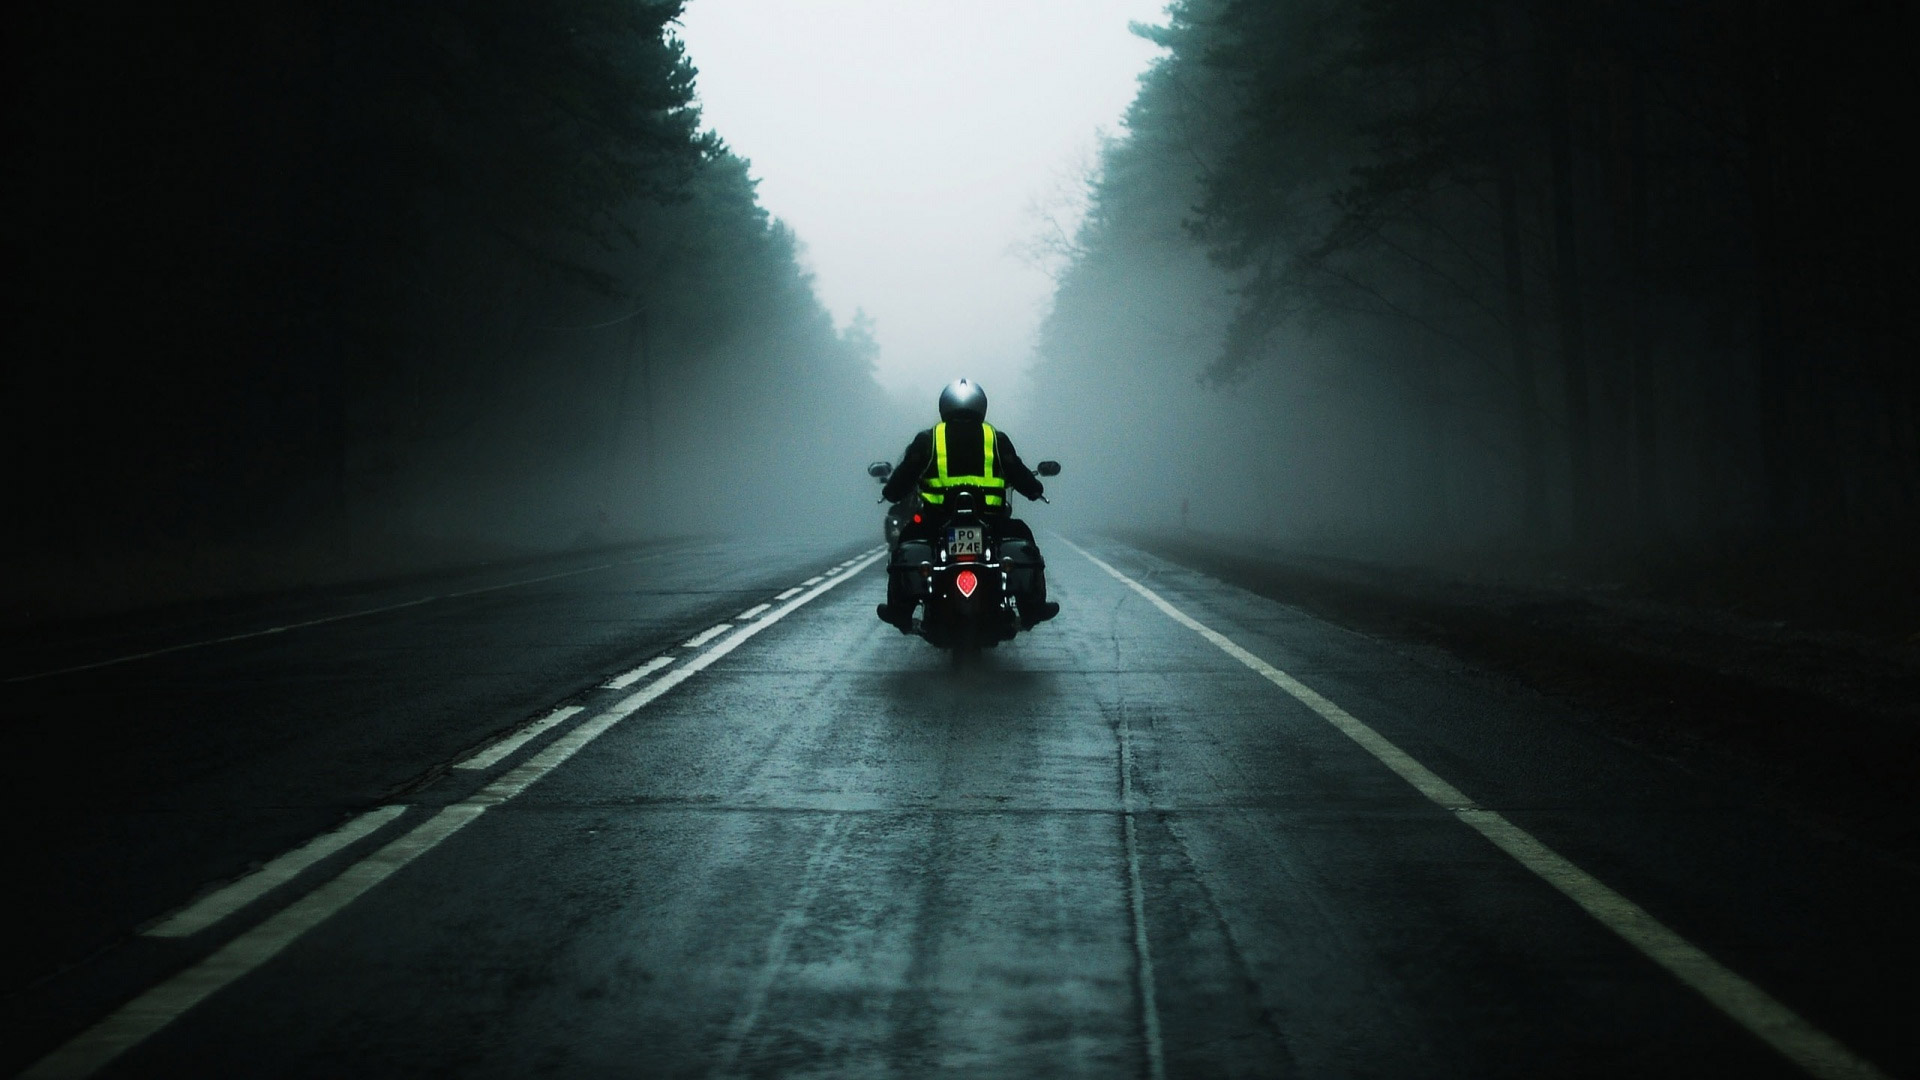 Police Motorcycle Wallpapers